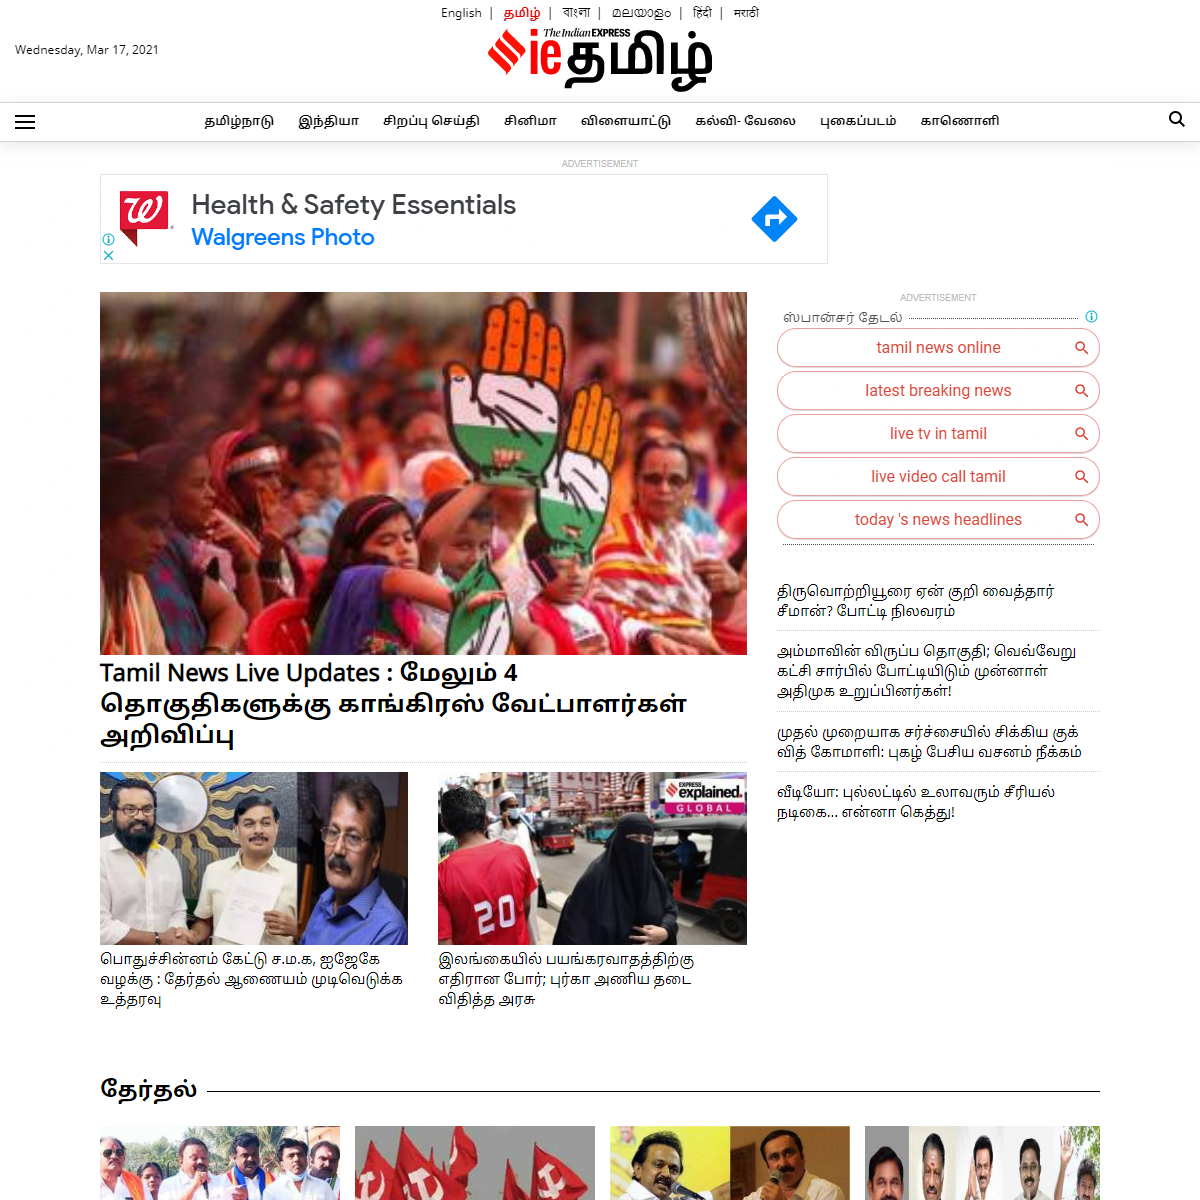 A complete backup of https://tamil.indianexpress.com/